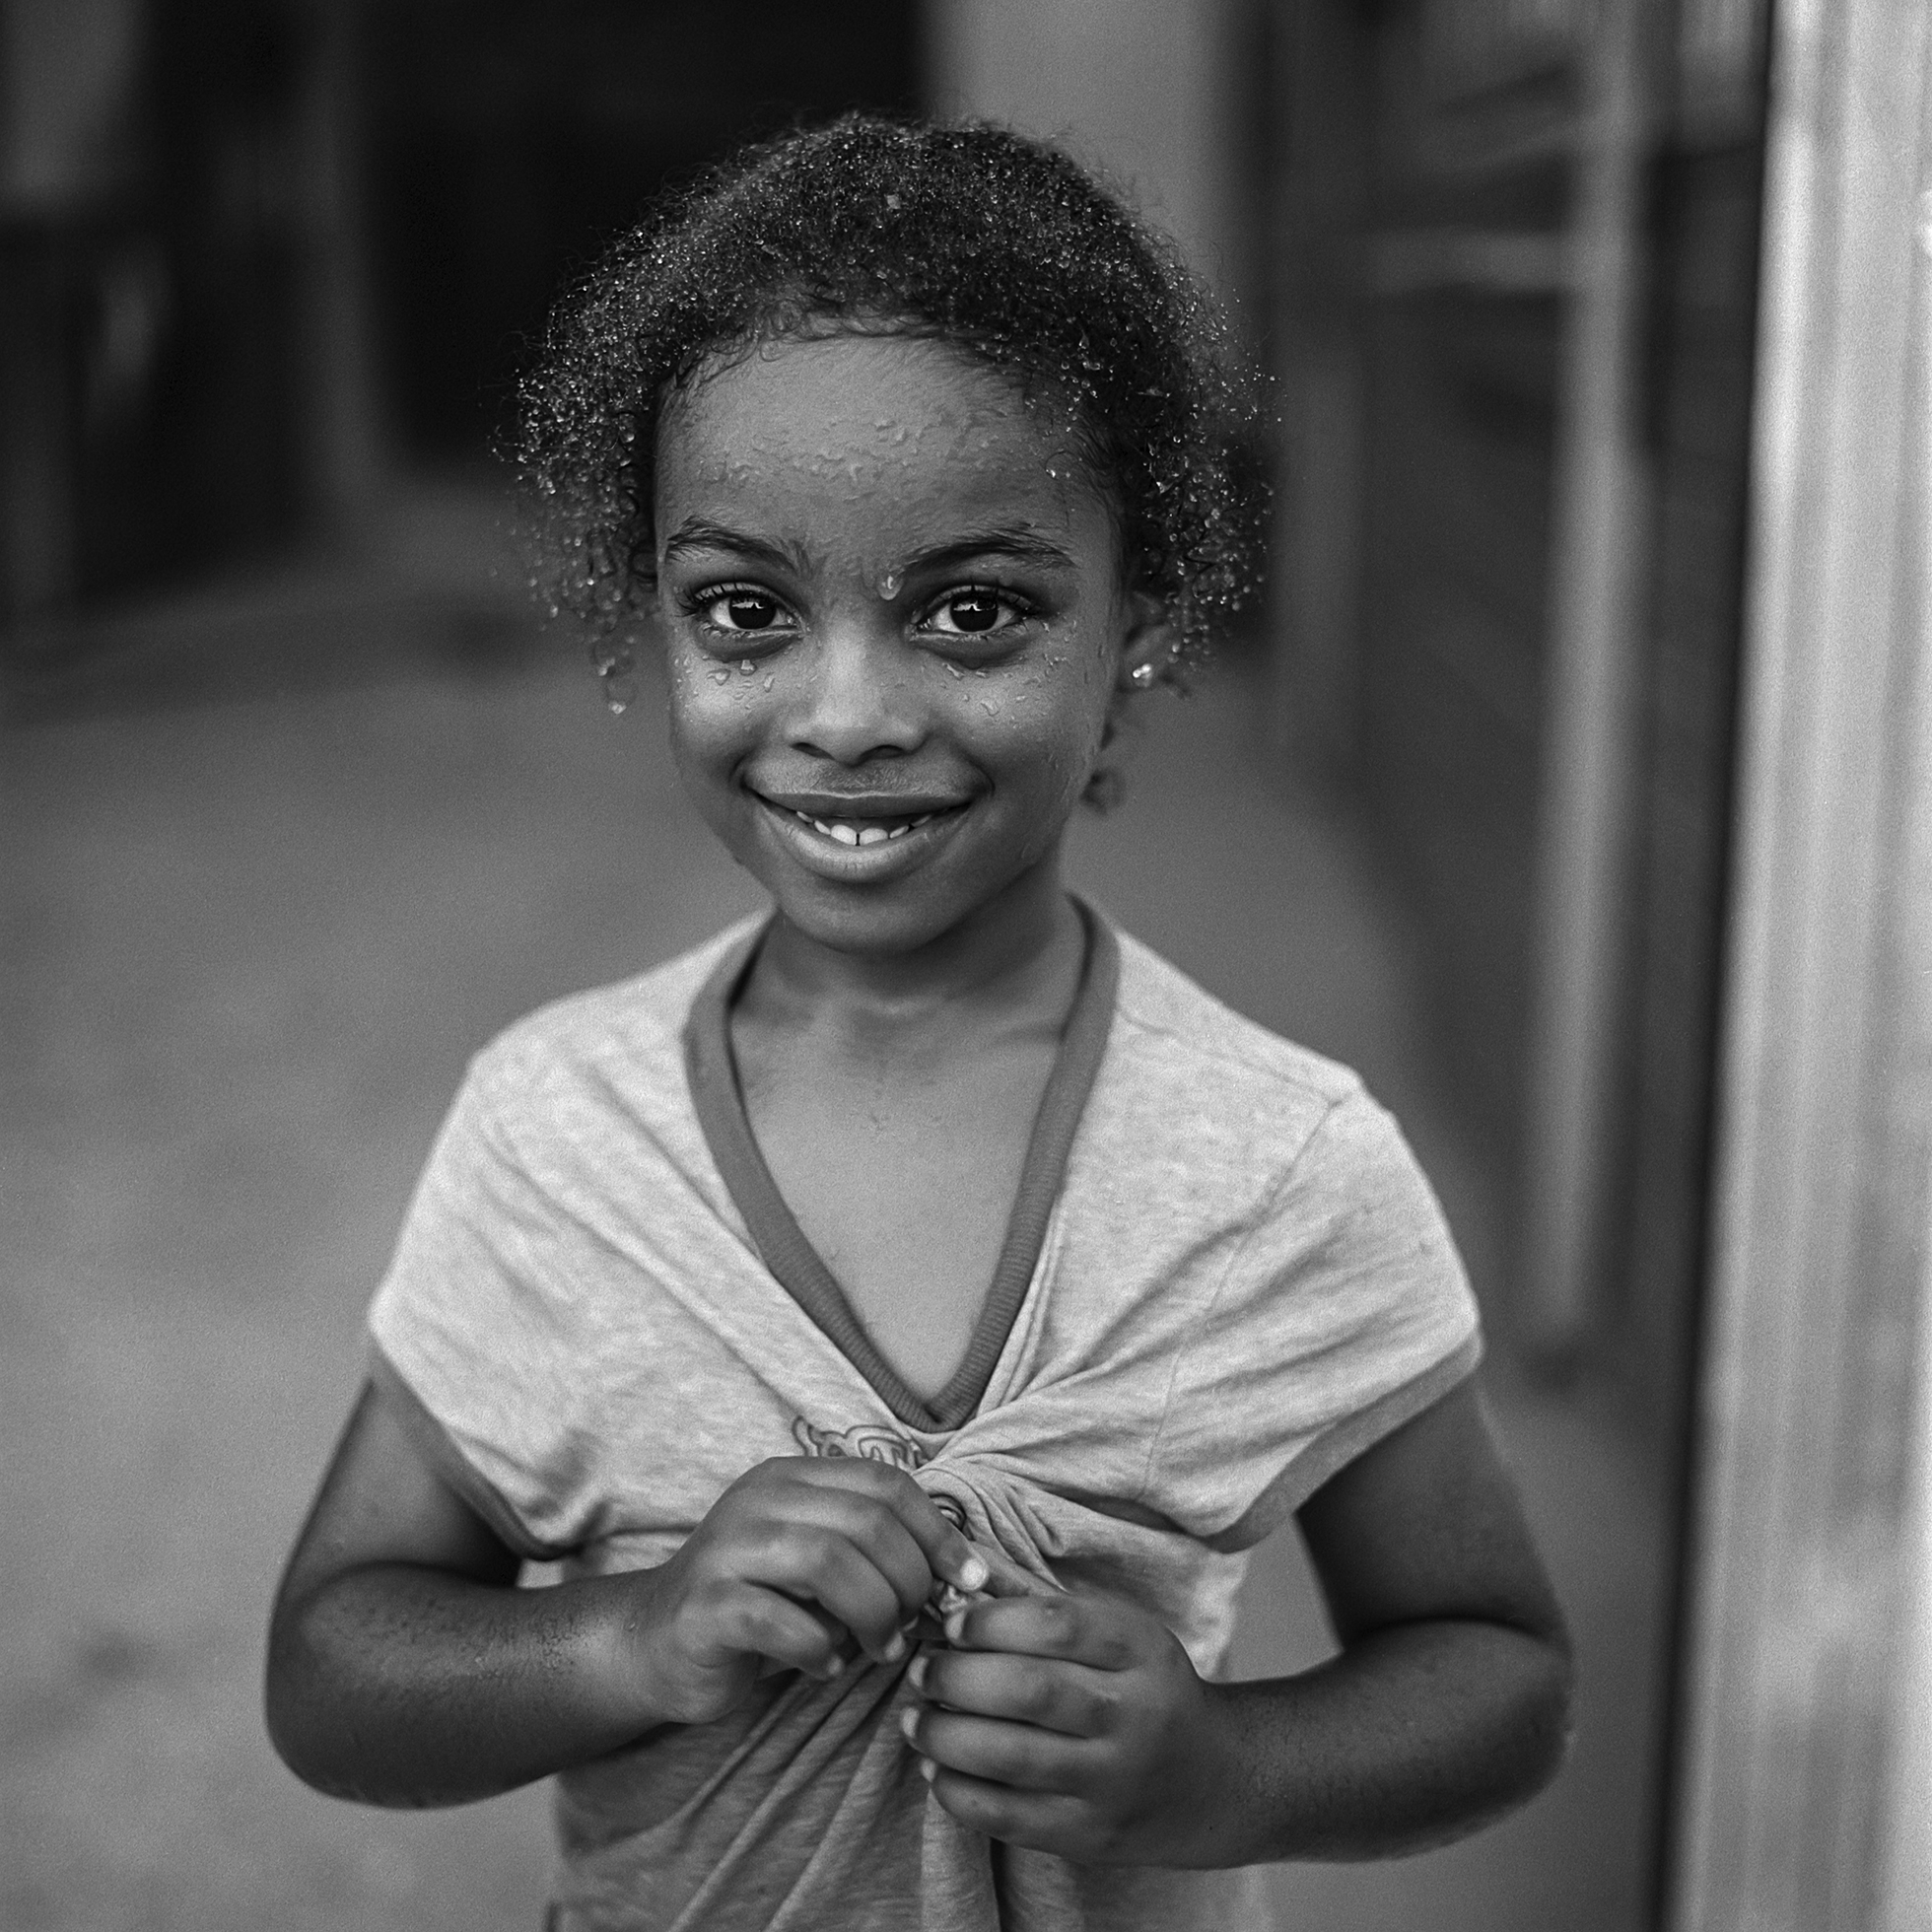 A young girl whose face and hair are wet smiles at the camera. She is standing in a barn and wearing a T-shirt that is dry that she crumples in her hands.